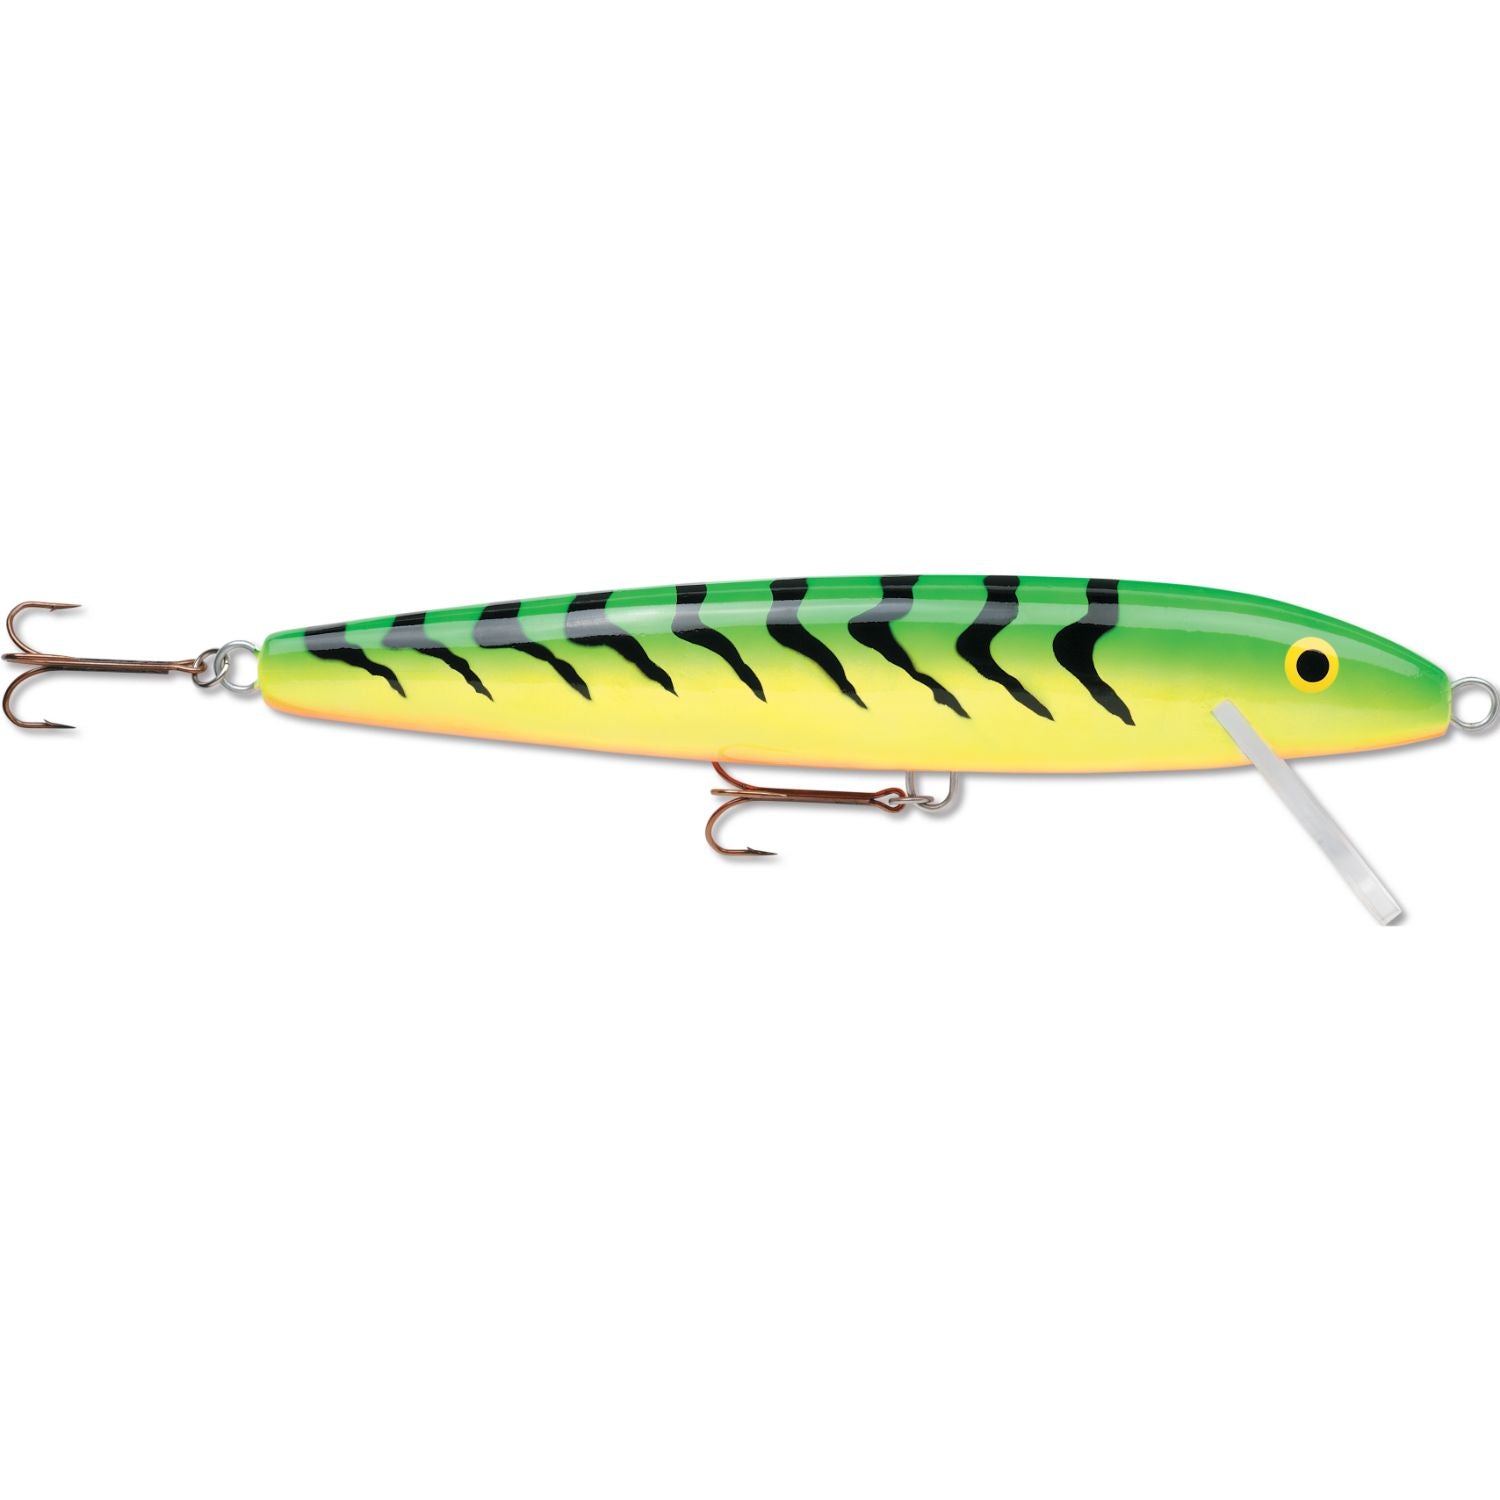 Plain Mepps Salmon Kit Lure Assortment from Fish On Outlet